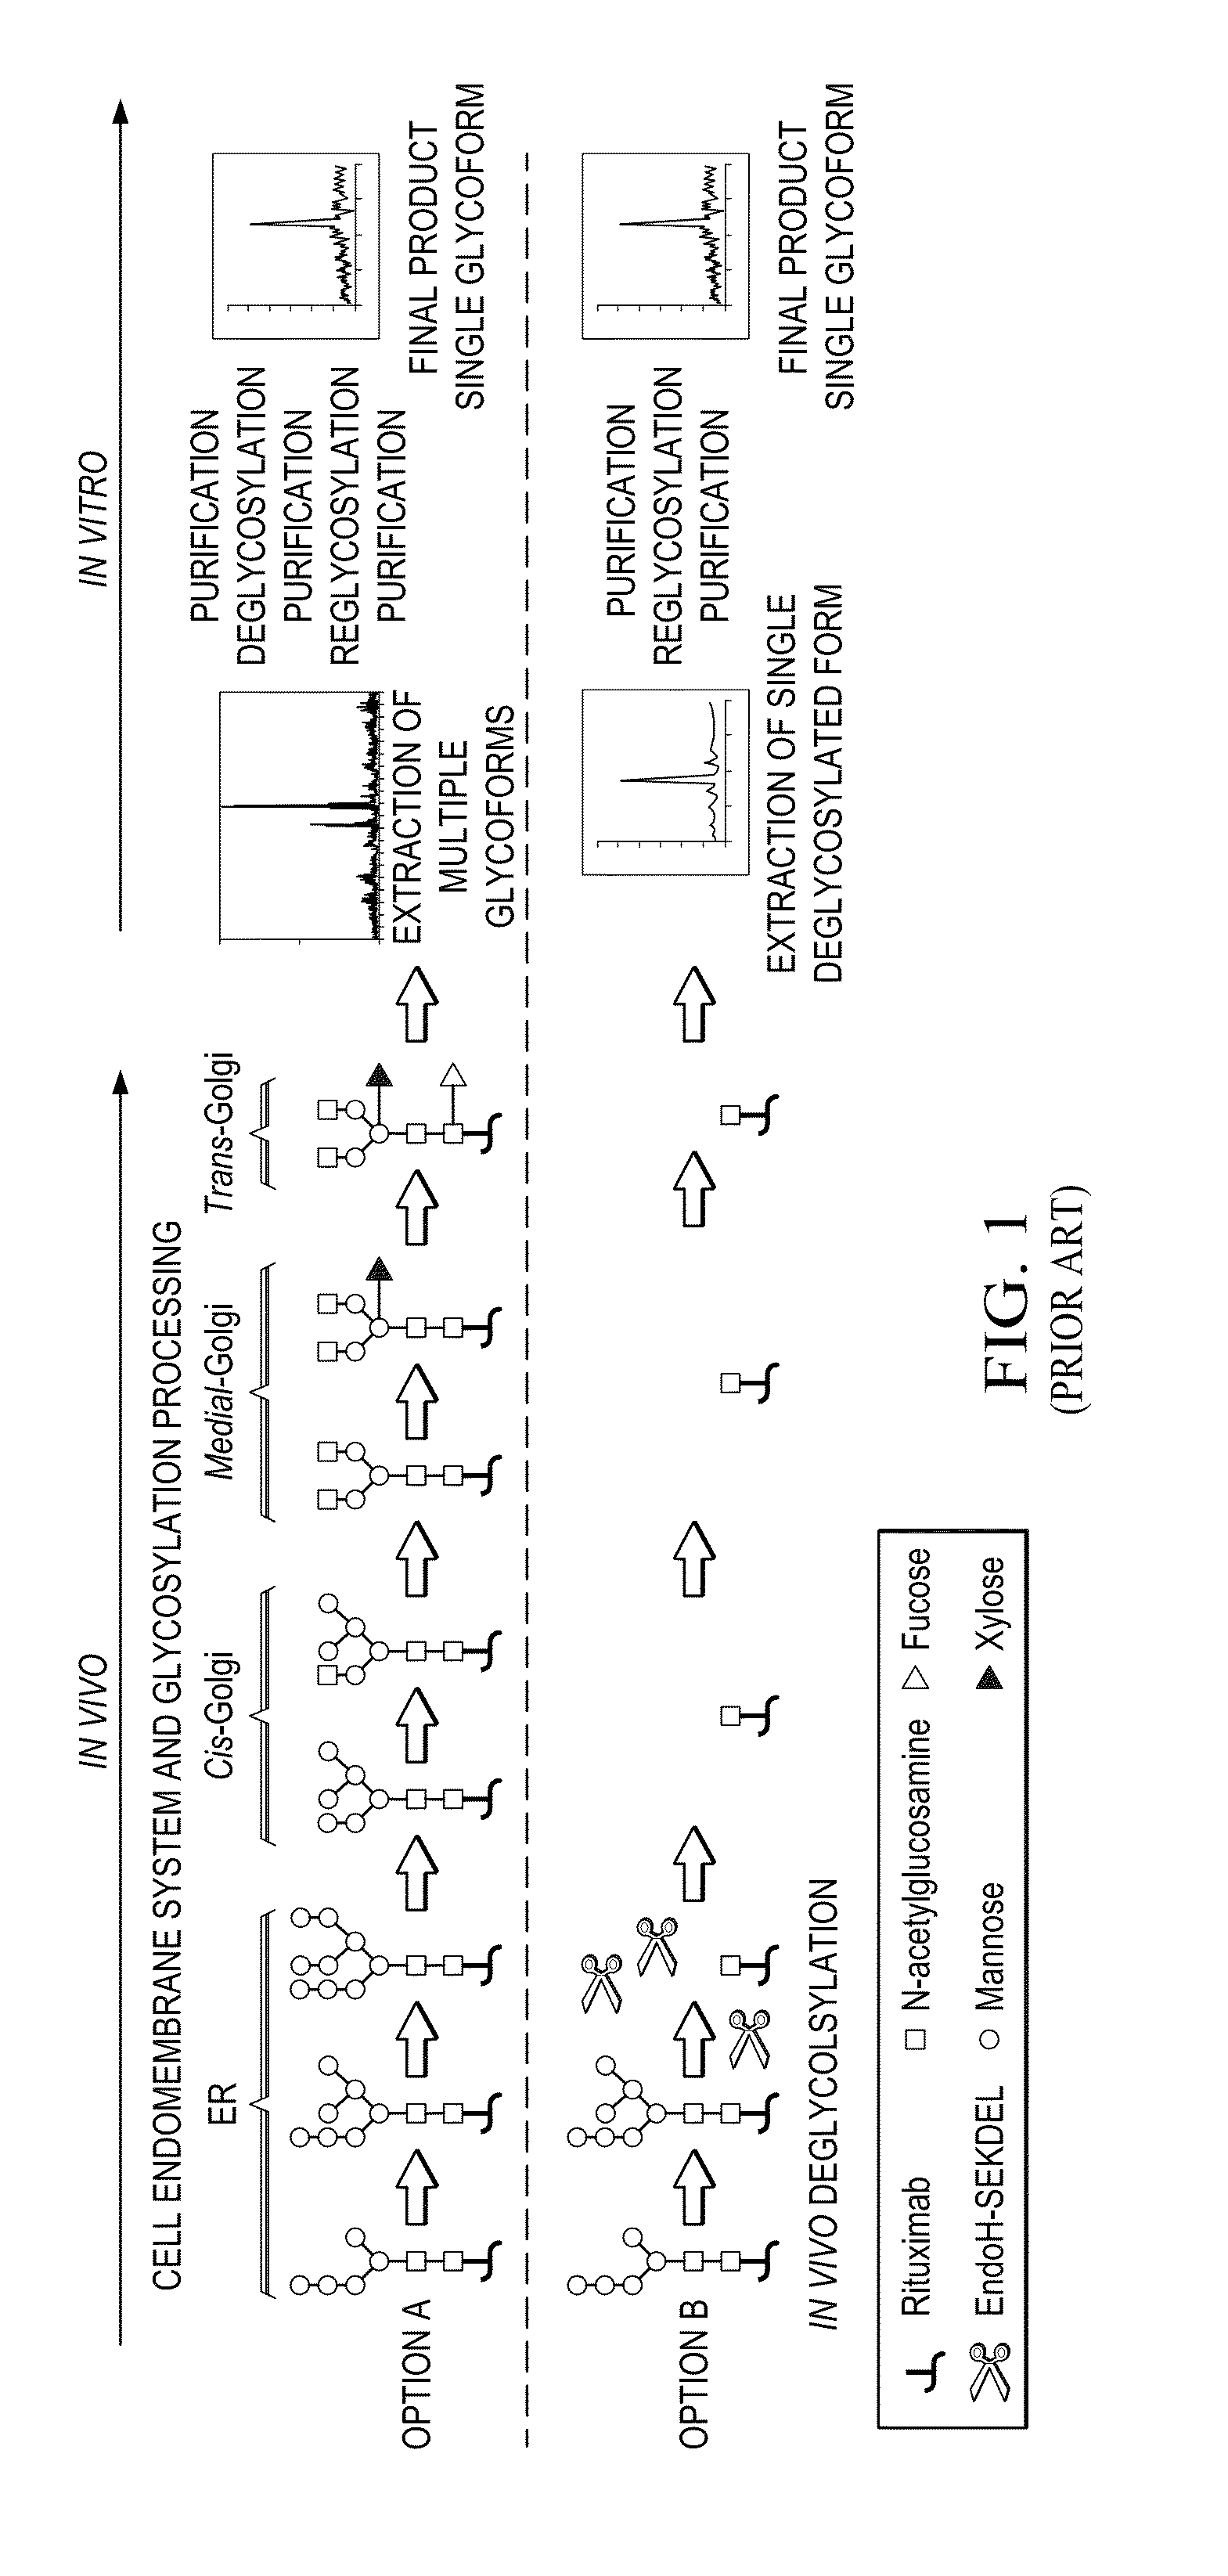 Method for in Vivo Production of Deglycosylated Recombinant Proteins Used as Substrate for Downstream Protein Glycoremodeling